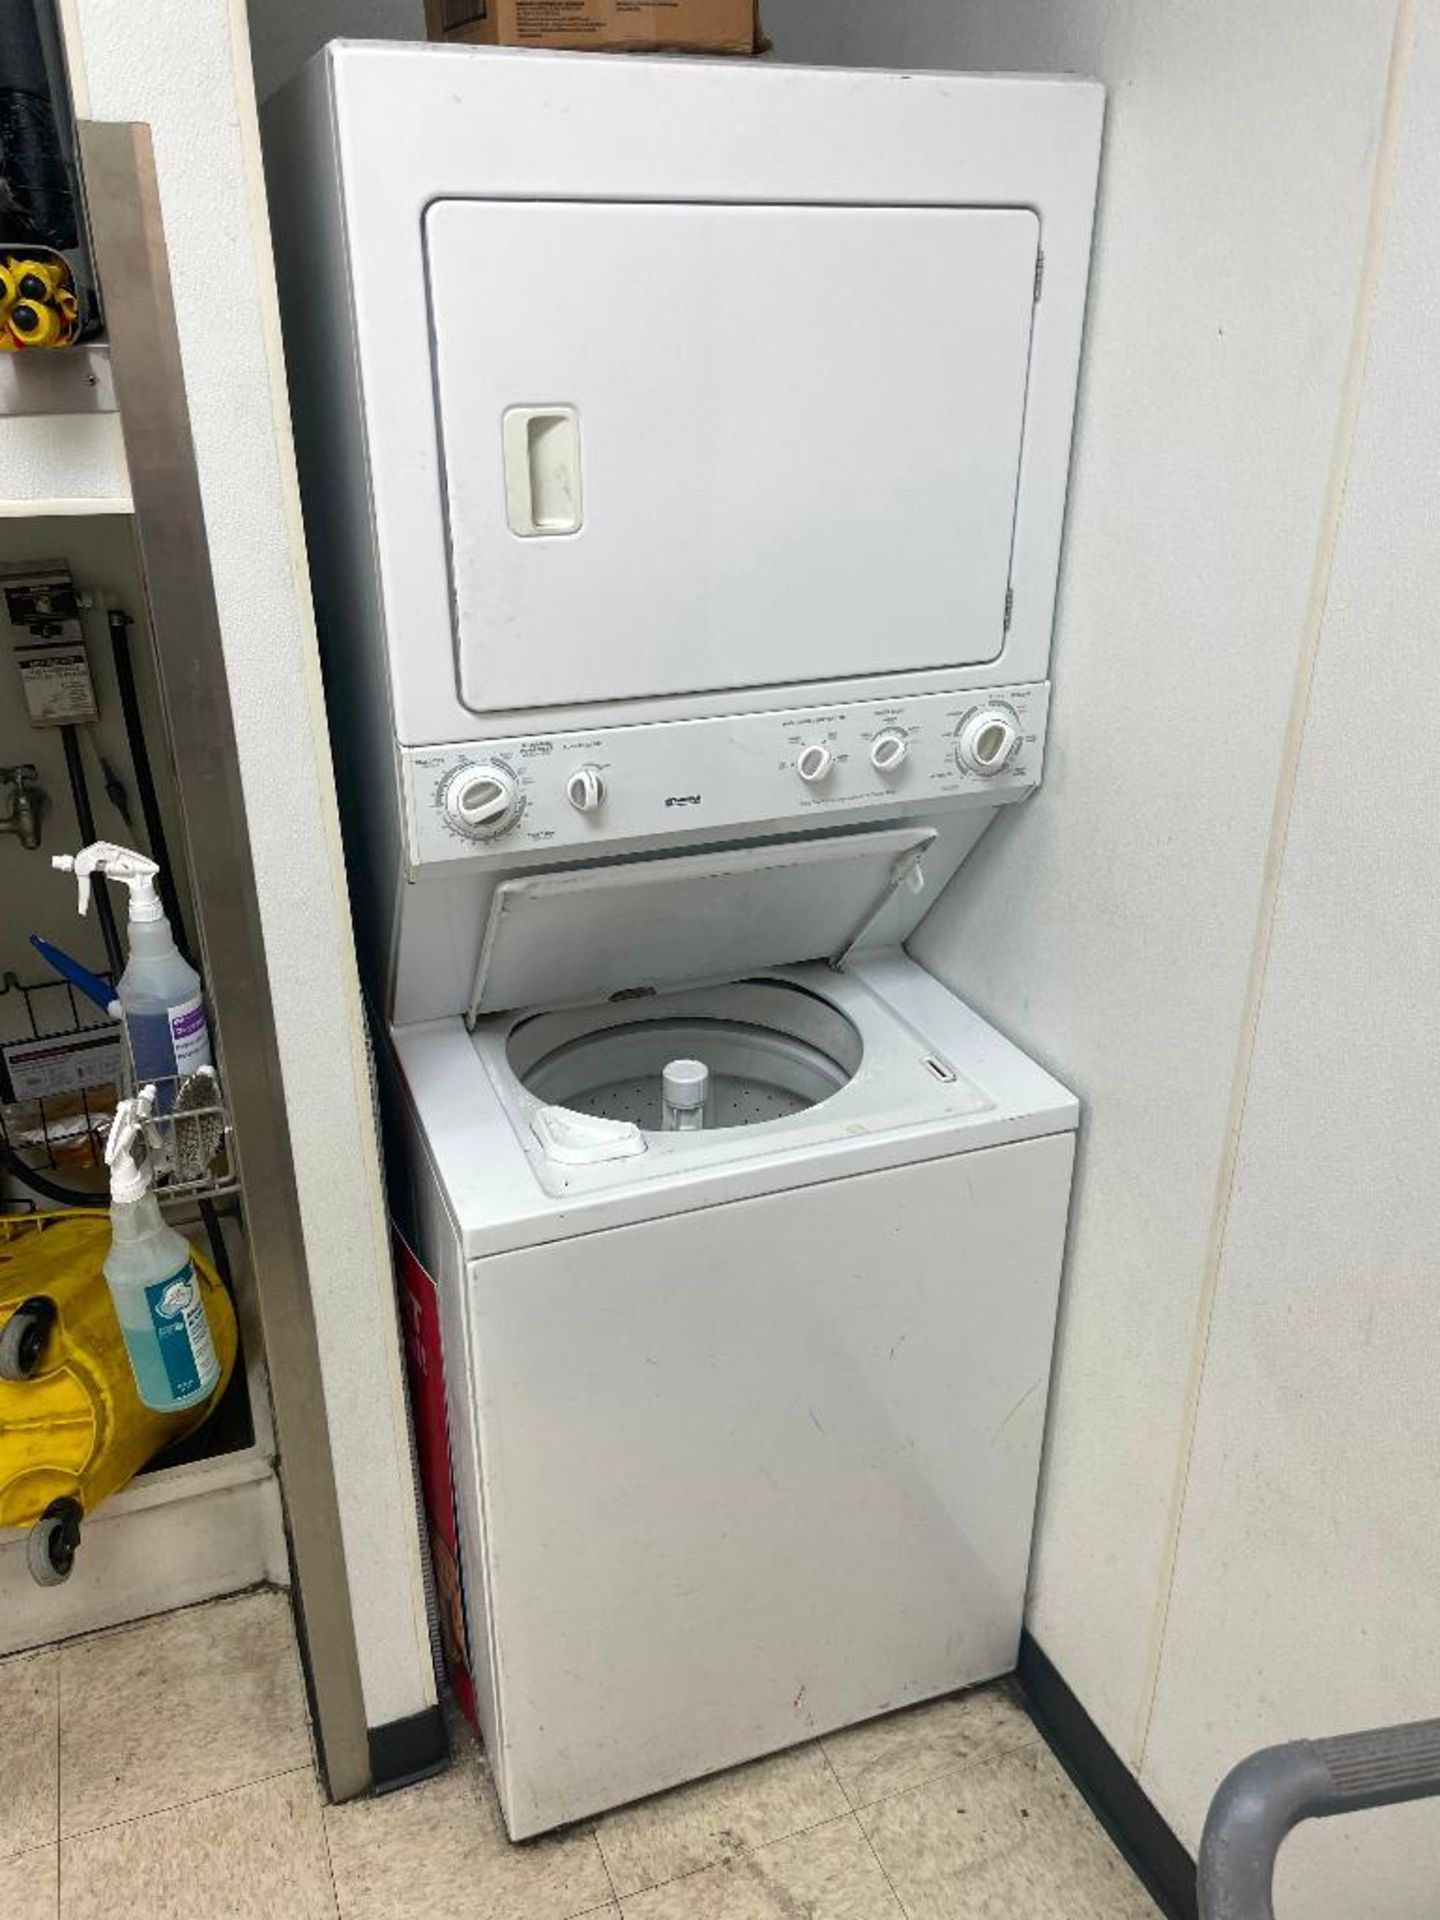 DESCRIPTION: KENMORE HOUSE HOLD WASHING MACHINE AND DRYER UNIT BRAND / MODEL: KENMORE LOCATION: 4811